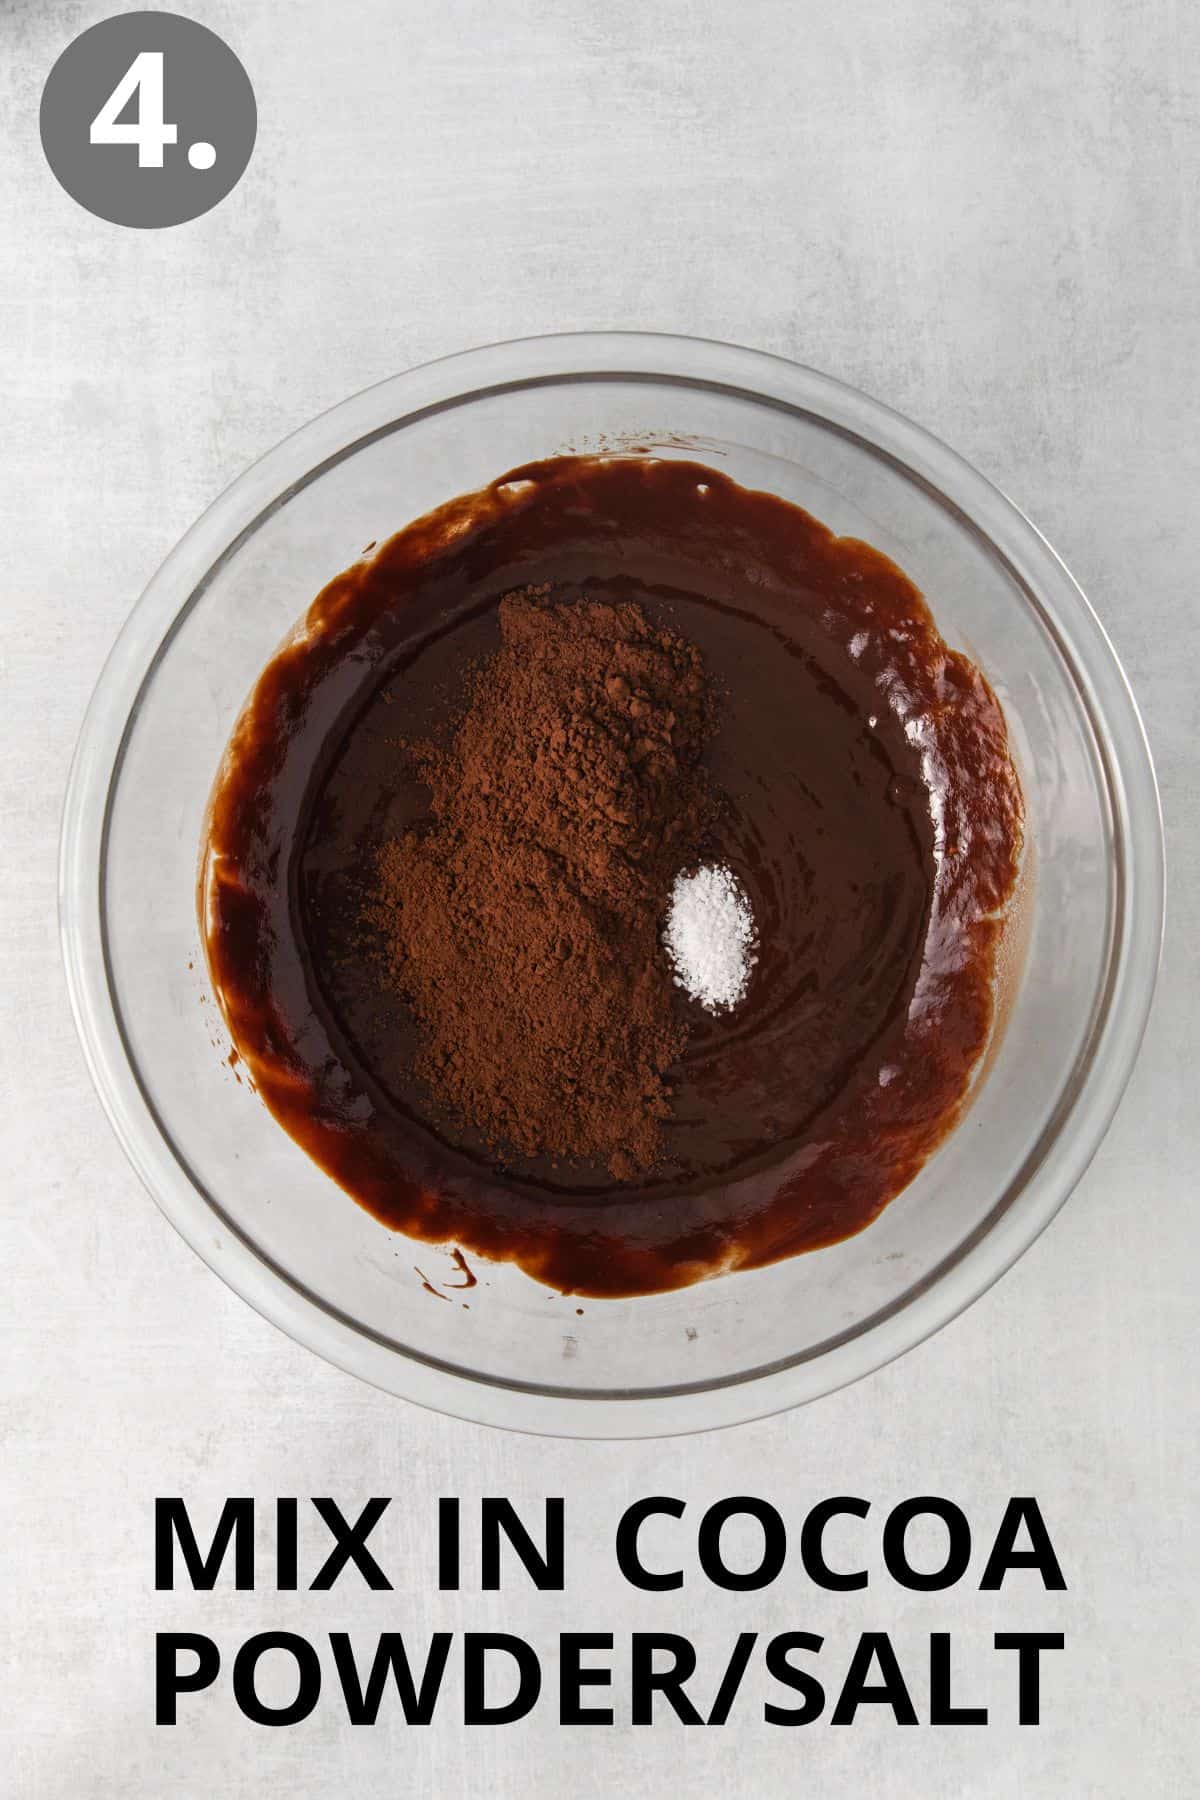 Cocoa powder and salt mixed into the batter in a glass bowl